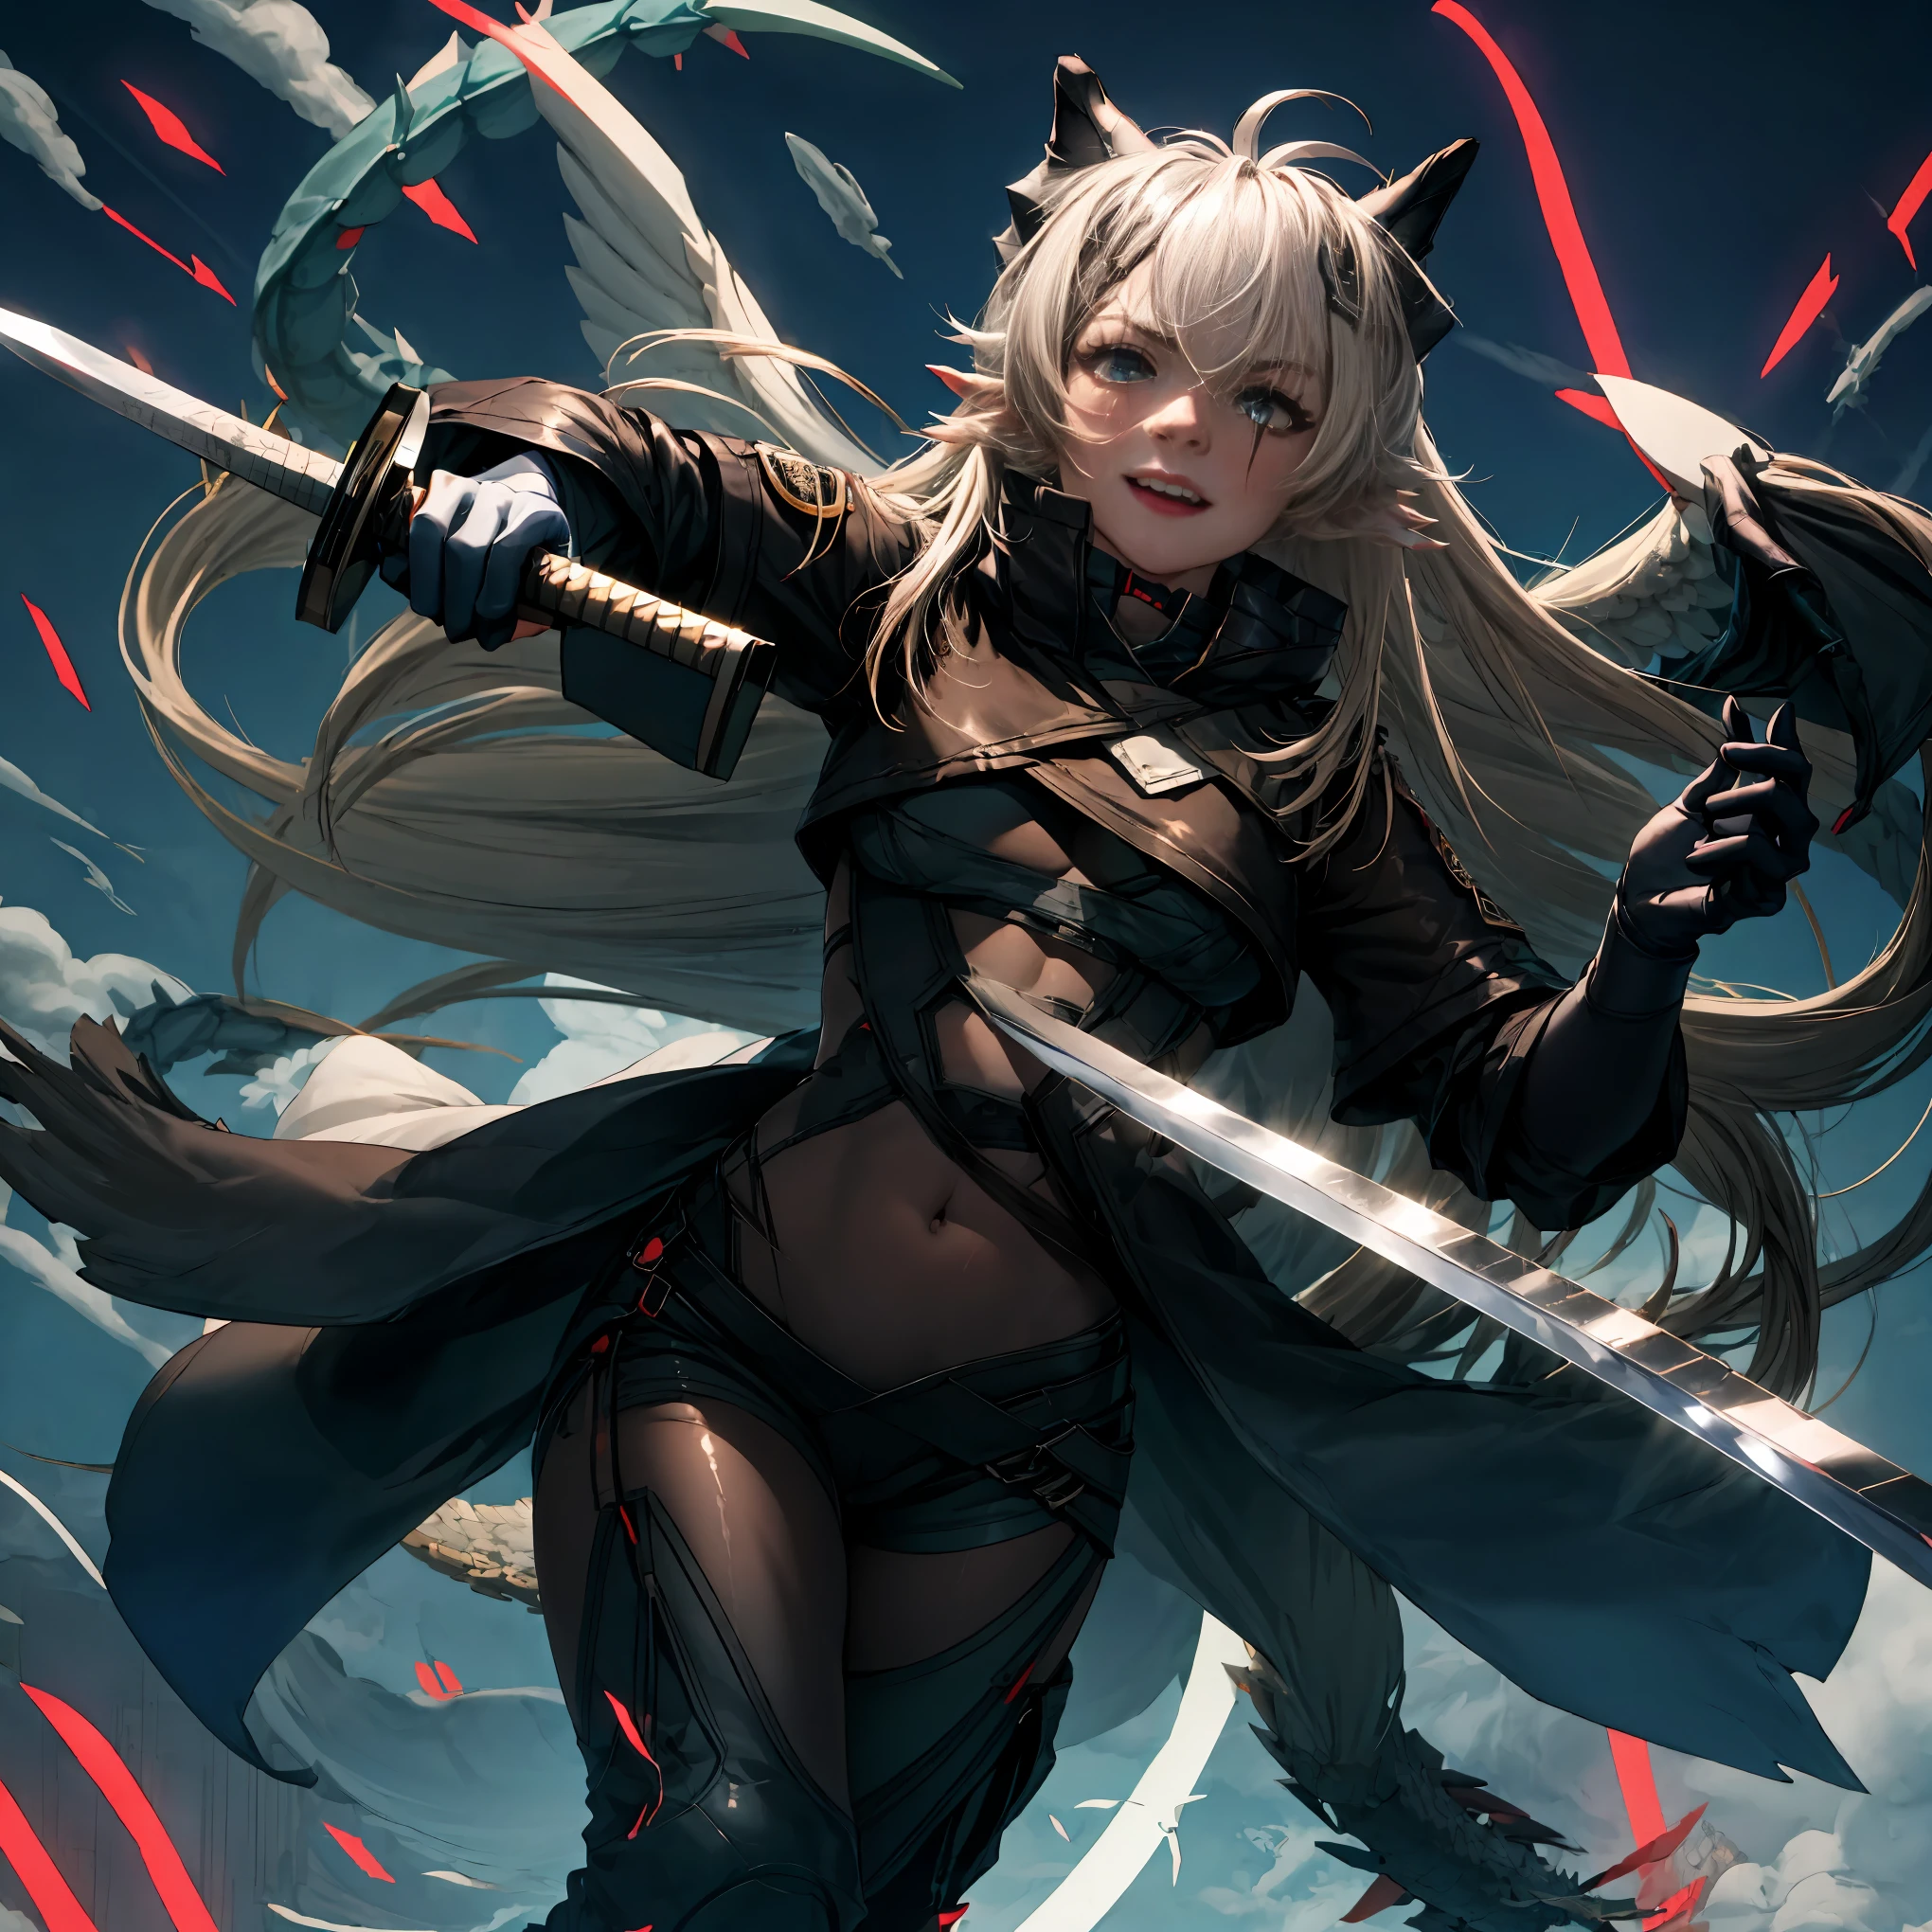 masterpiece, 8k, resolution, high quality, high resolution, best quality, extremally detailed, best resolution, absurd resolution, ray tracing, high detailed, masterpiece, extremely detailed,detailed angelic face, shoulder length white hair, female, 2 white fox ears, teenage girl, slime body, white scale dragon tail, military boots,black leggings, military combat pants, black T-shirt, white jacket open, medium size chest, detailed blue eyes,solo female,1 dragon tail, tomboyish, thick dragon tail, white scales, 2 dragon wings, white fluffy dragon wings, detailed face, holding a katana sword,very detailed, amazing details,solo female, 1 female